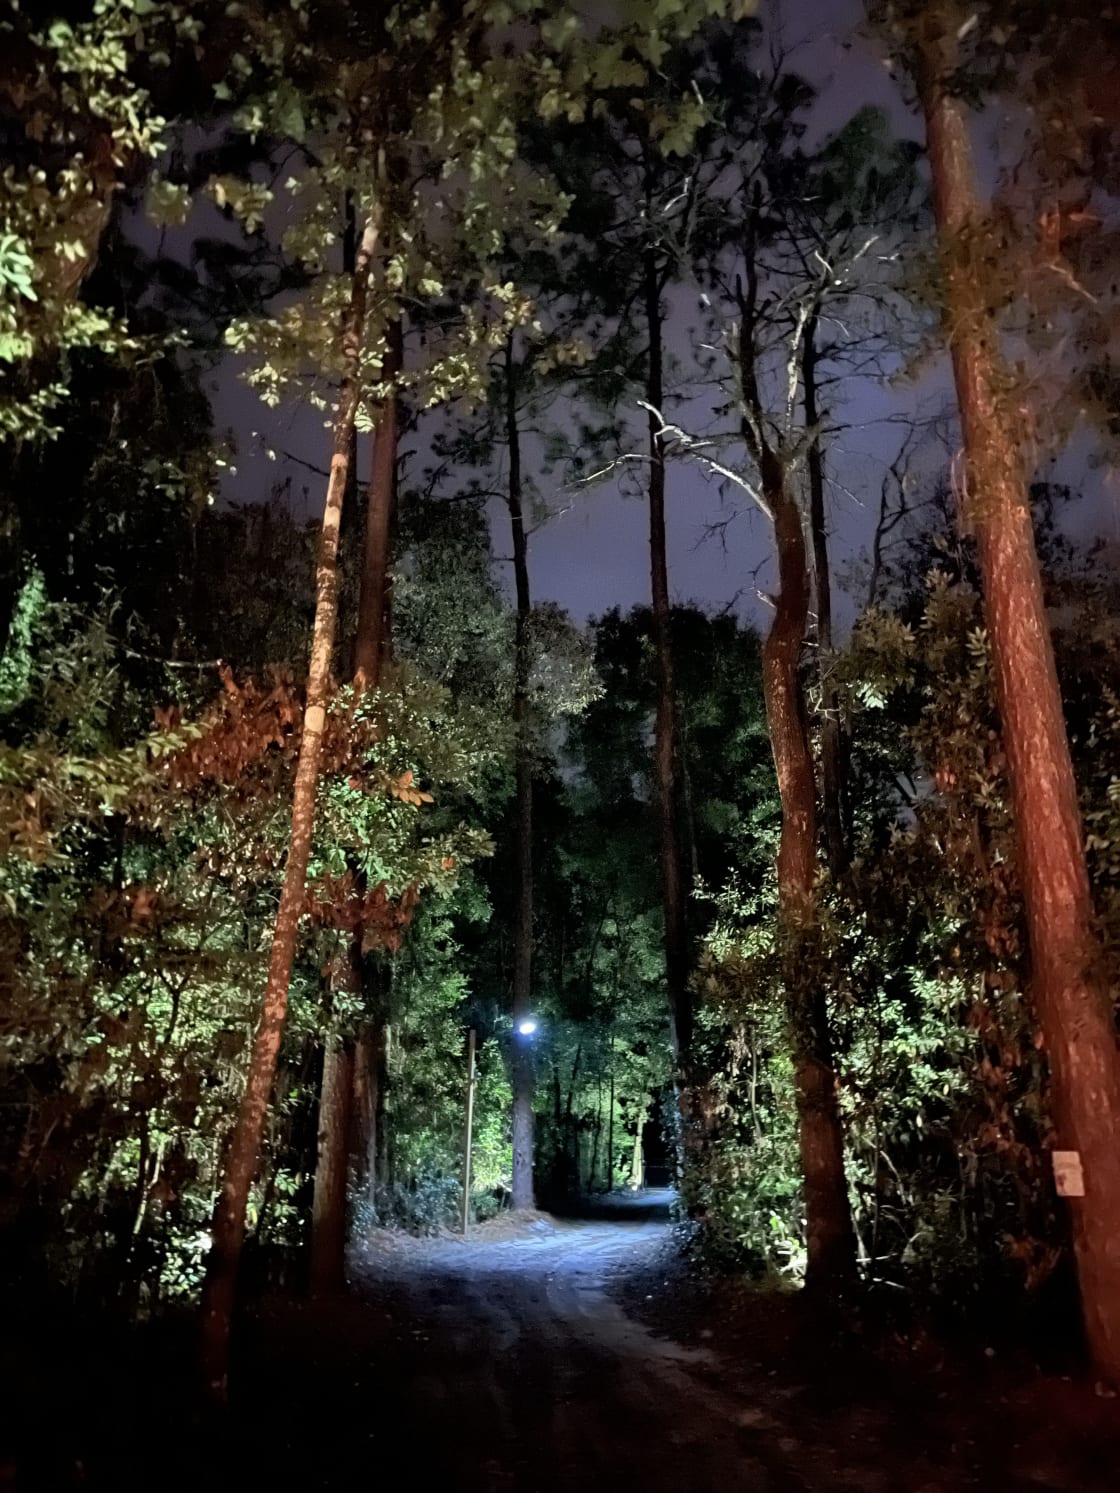 Entrance lighting to the property, creating a enchanted forest ambience.